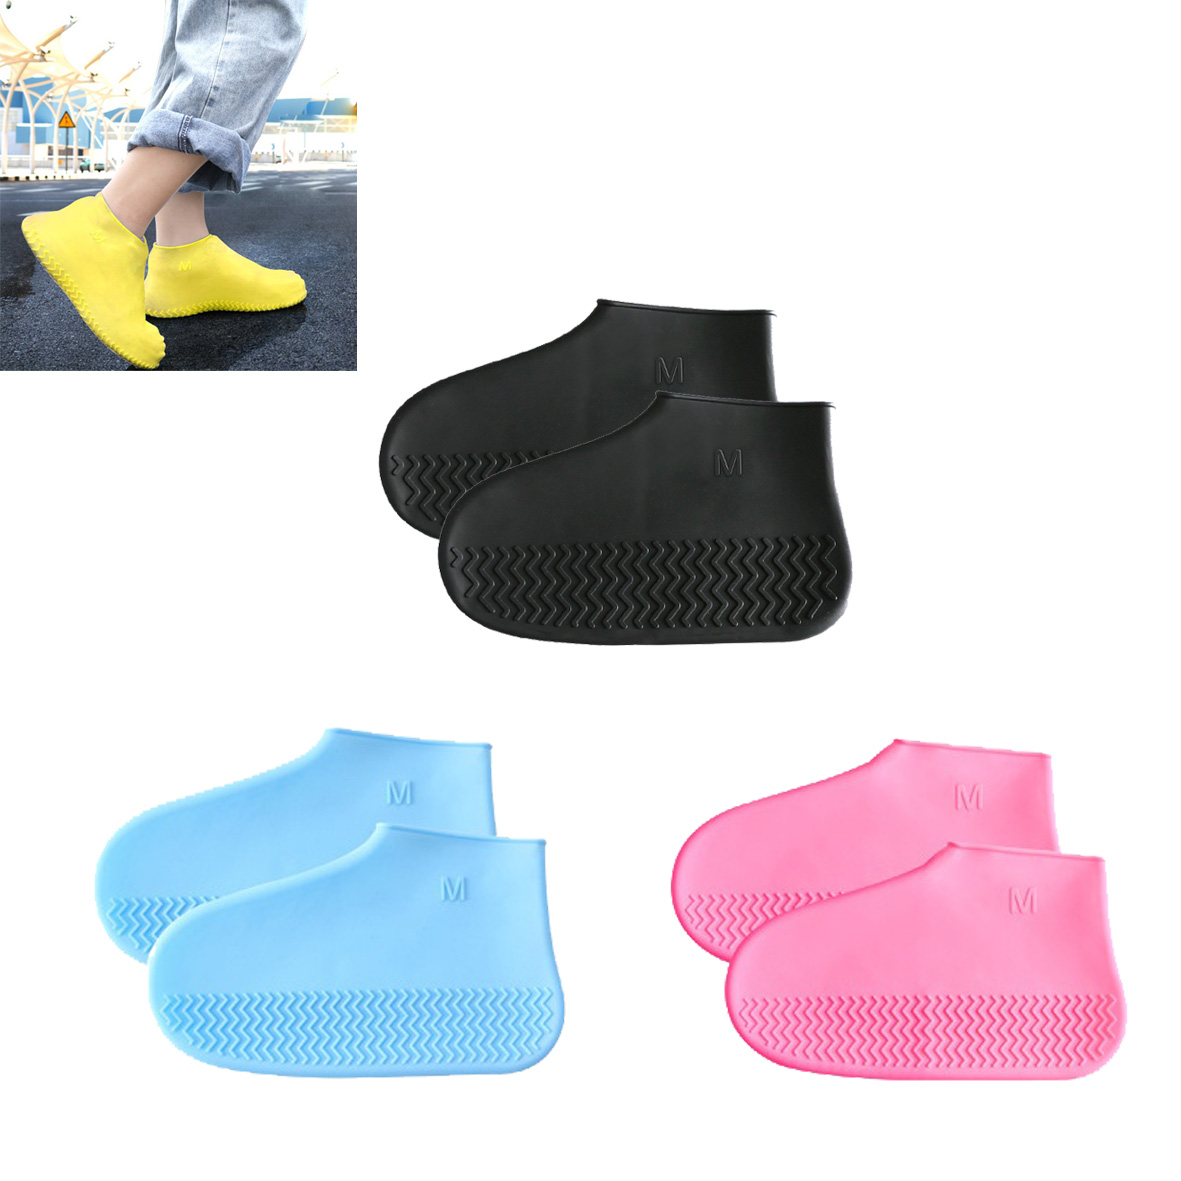 GL-AAJ1151 Silicone Waterproof Shoe Covers size M